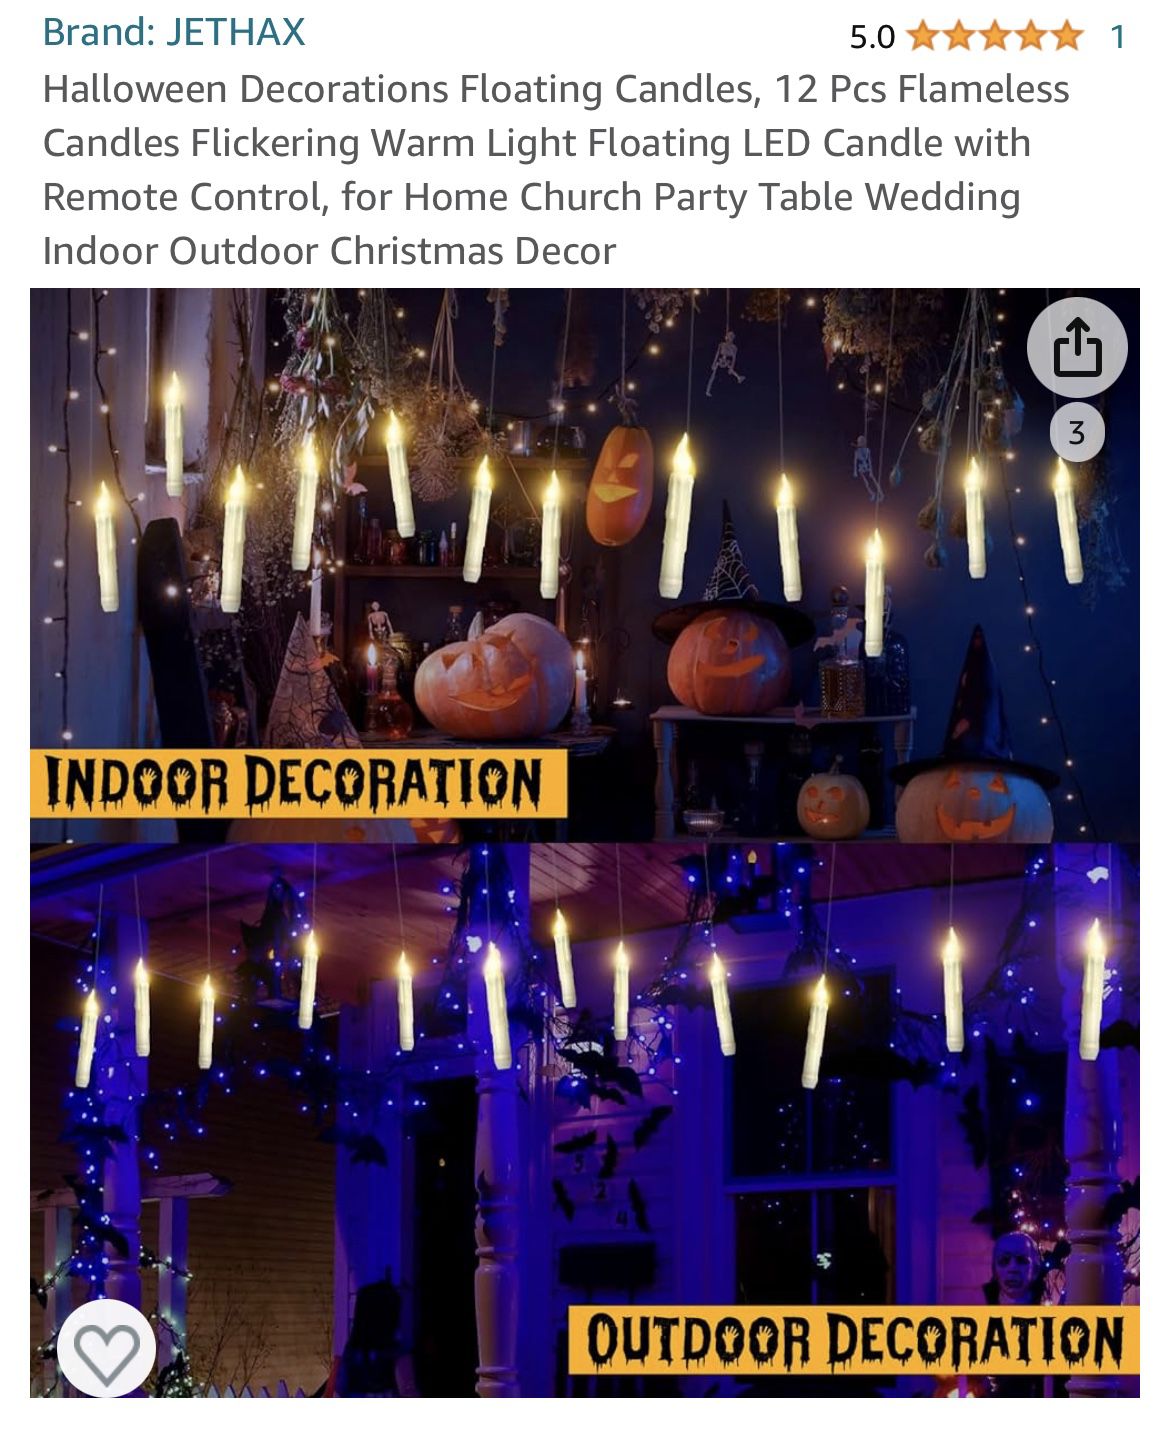 Halloween Decorations Floating Candles, 12 Pcs Flameless Candles Flickering Warm Light